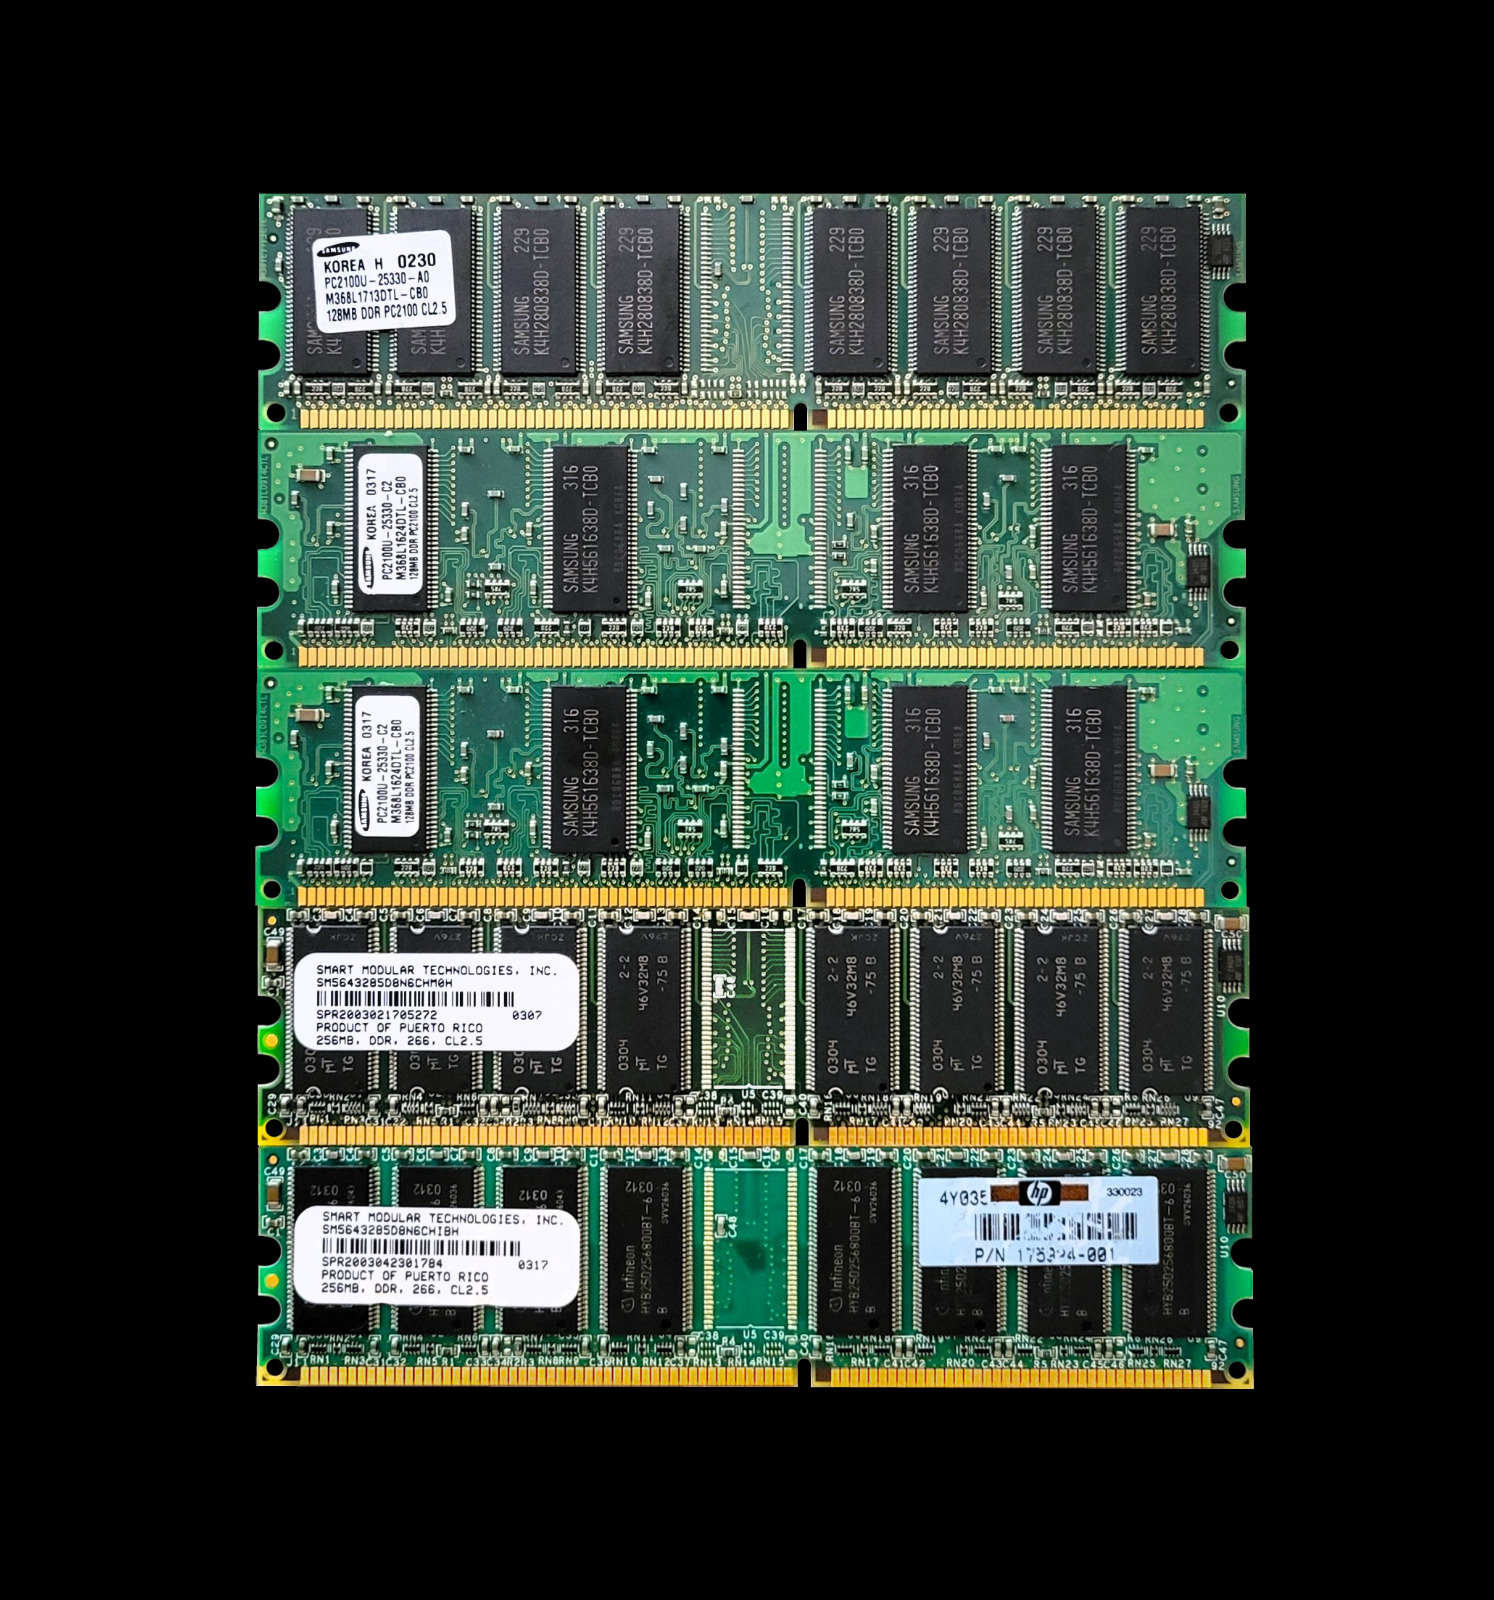 LOT of 5 (2-256MB) (3-128MB) PC2100 DDR-266MHz Mixed Memory Modules CL2.5 DIMM